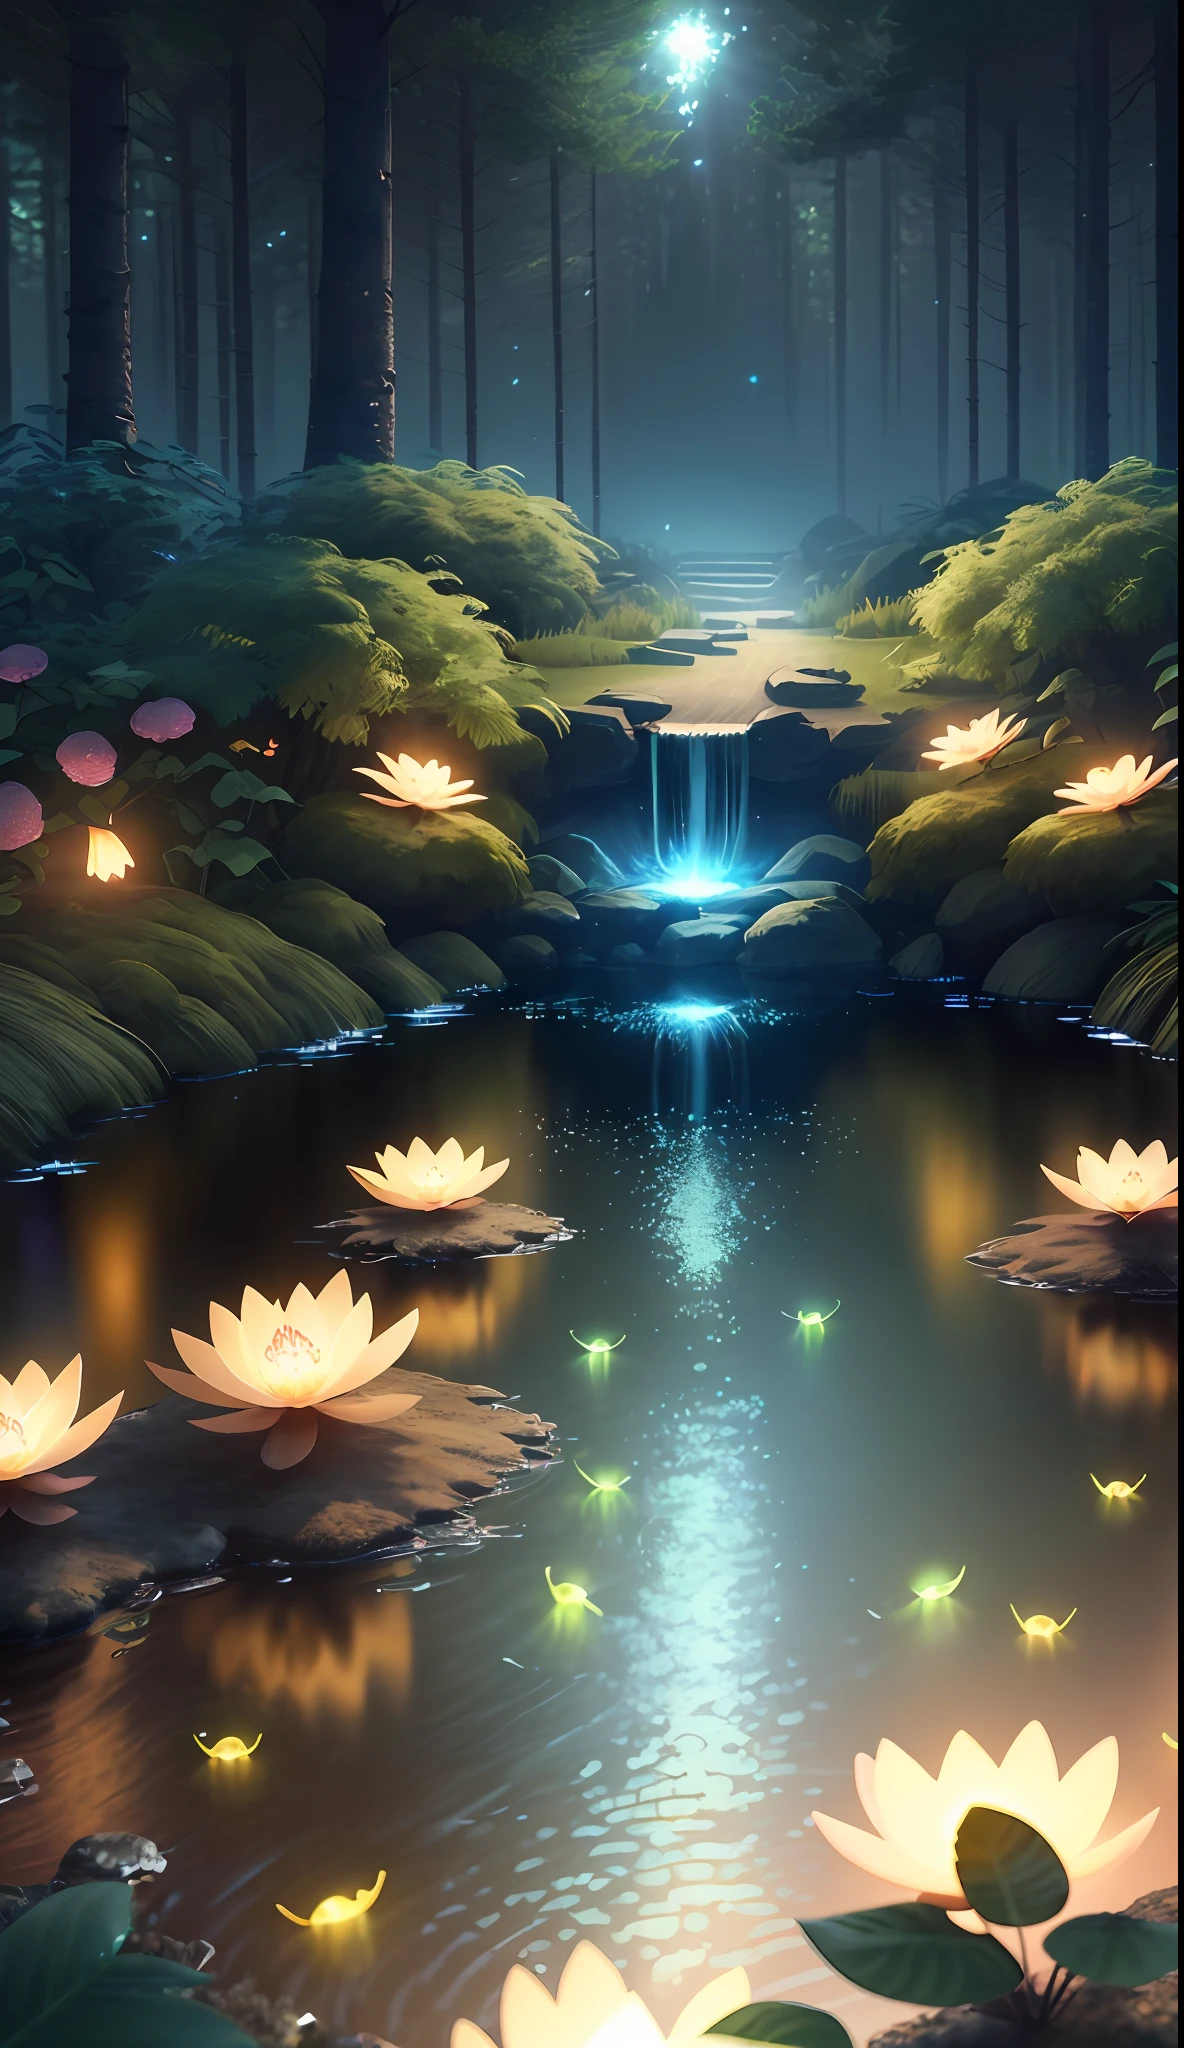 Masterpiece, best quality, (very detailed CG unified 8k wallpaper), (best quality), (best illustration), (best shadow), with a glowing giant firefly, natural elements in lake pool, forest theme. Mysterious forest, beautiful forest, nature, surrounded by flowers, delicate leaves and branches surrounded by fireflies (natural elements), (jungle theme), (leaves), (branches), (fireflies), (particle effects) and other 3D, Octane rendering, ray tracing, super detailed